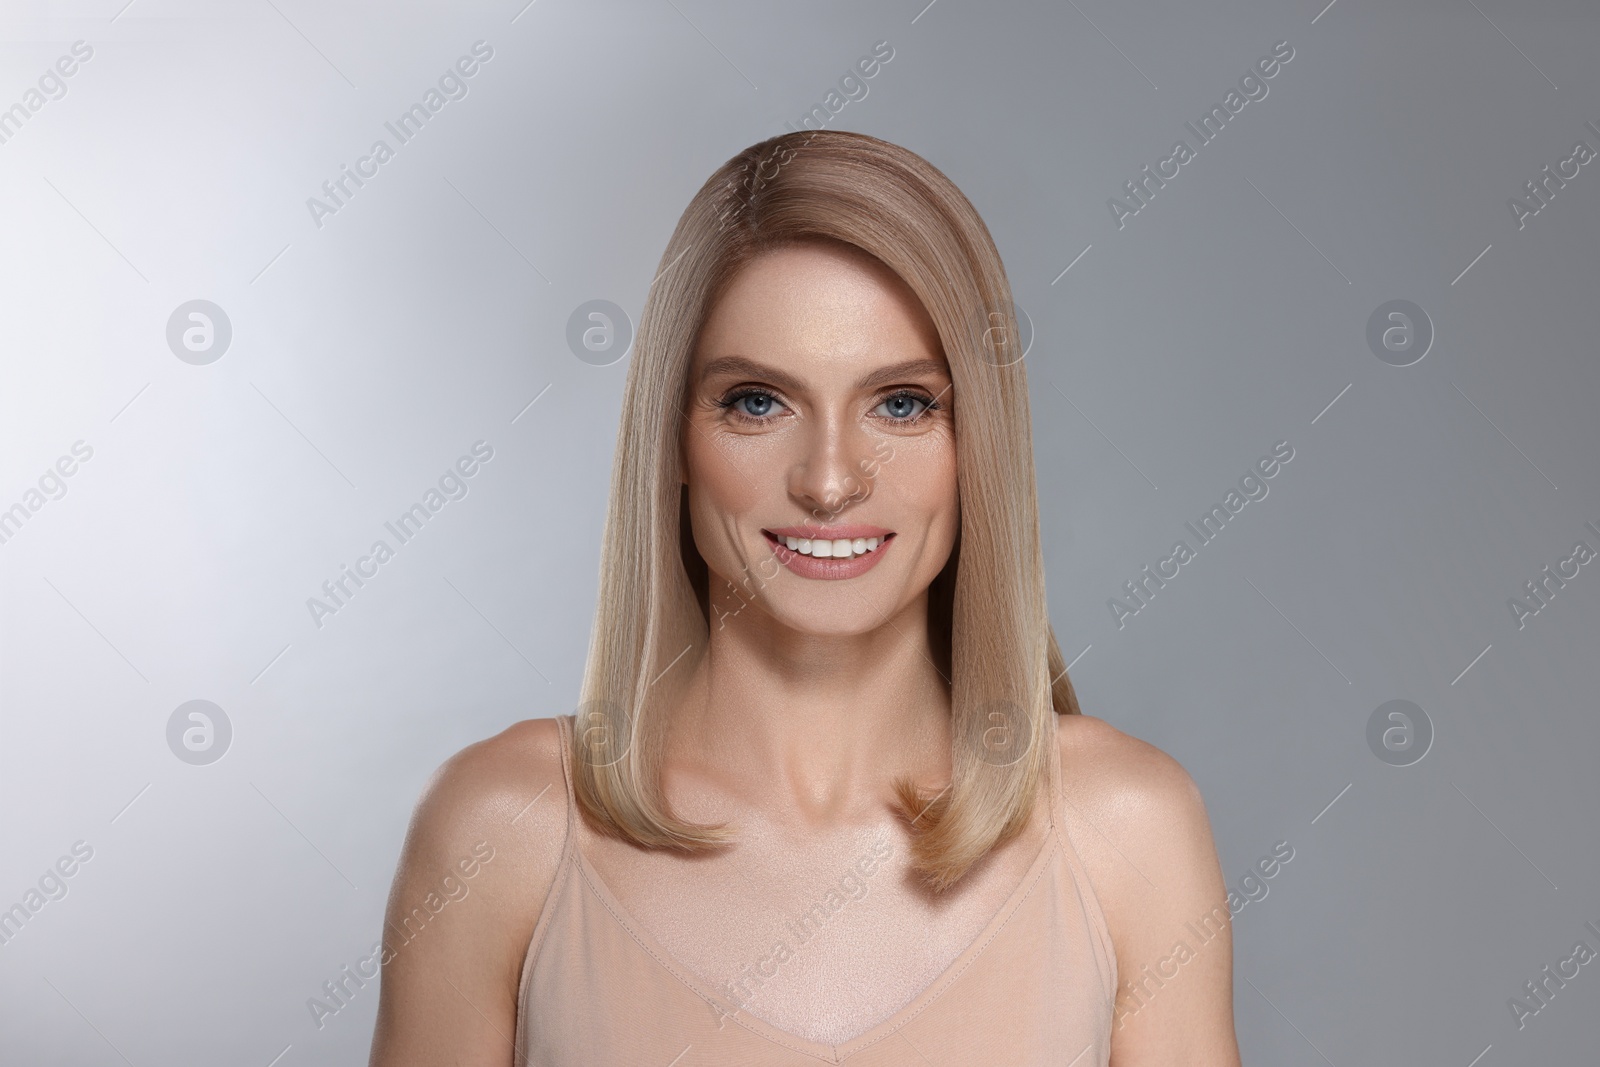 Image of Portrait of attractive woman with blonde hair smiling on grey background